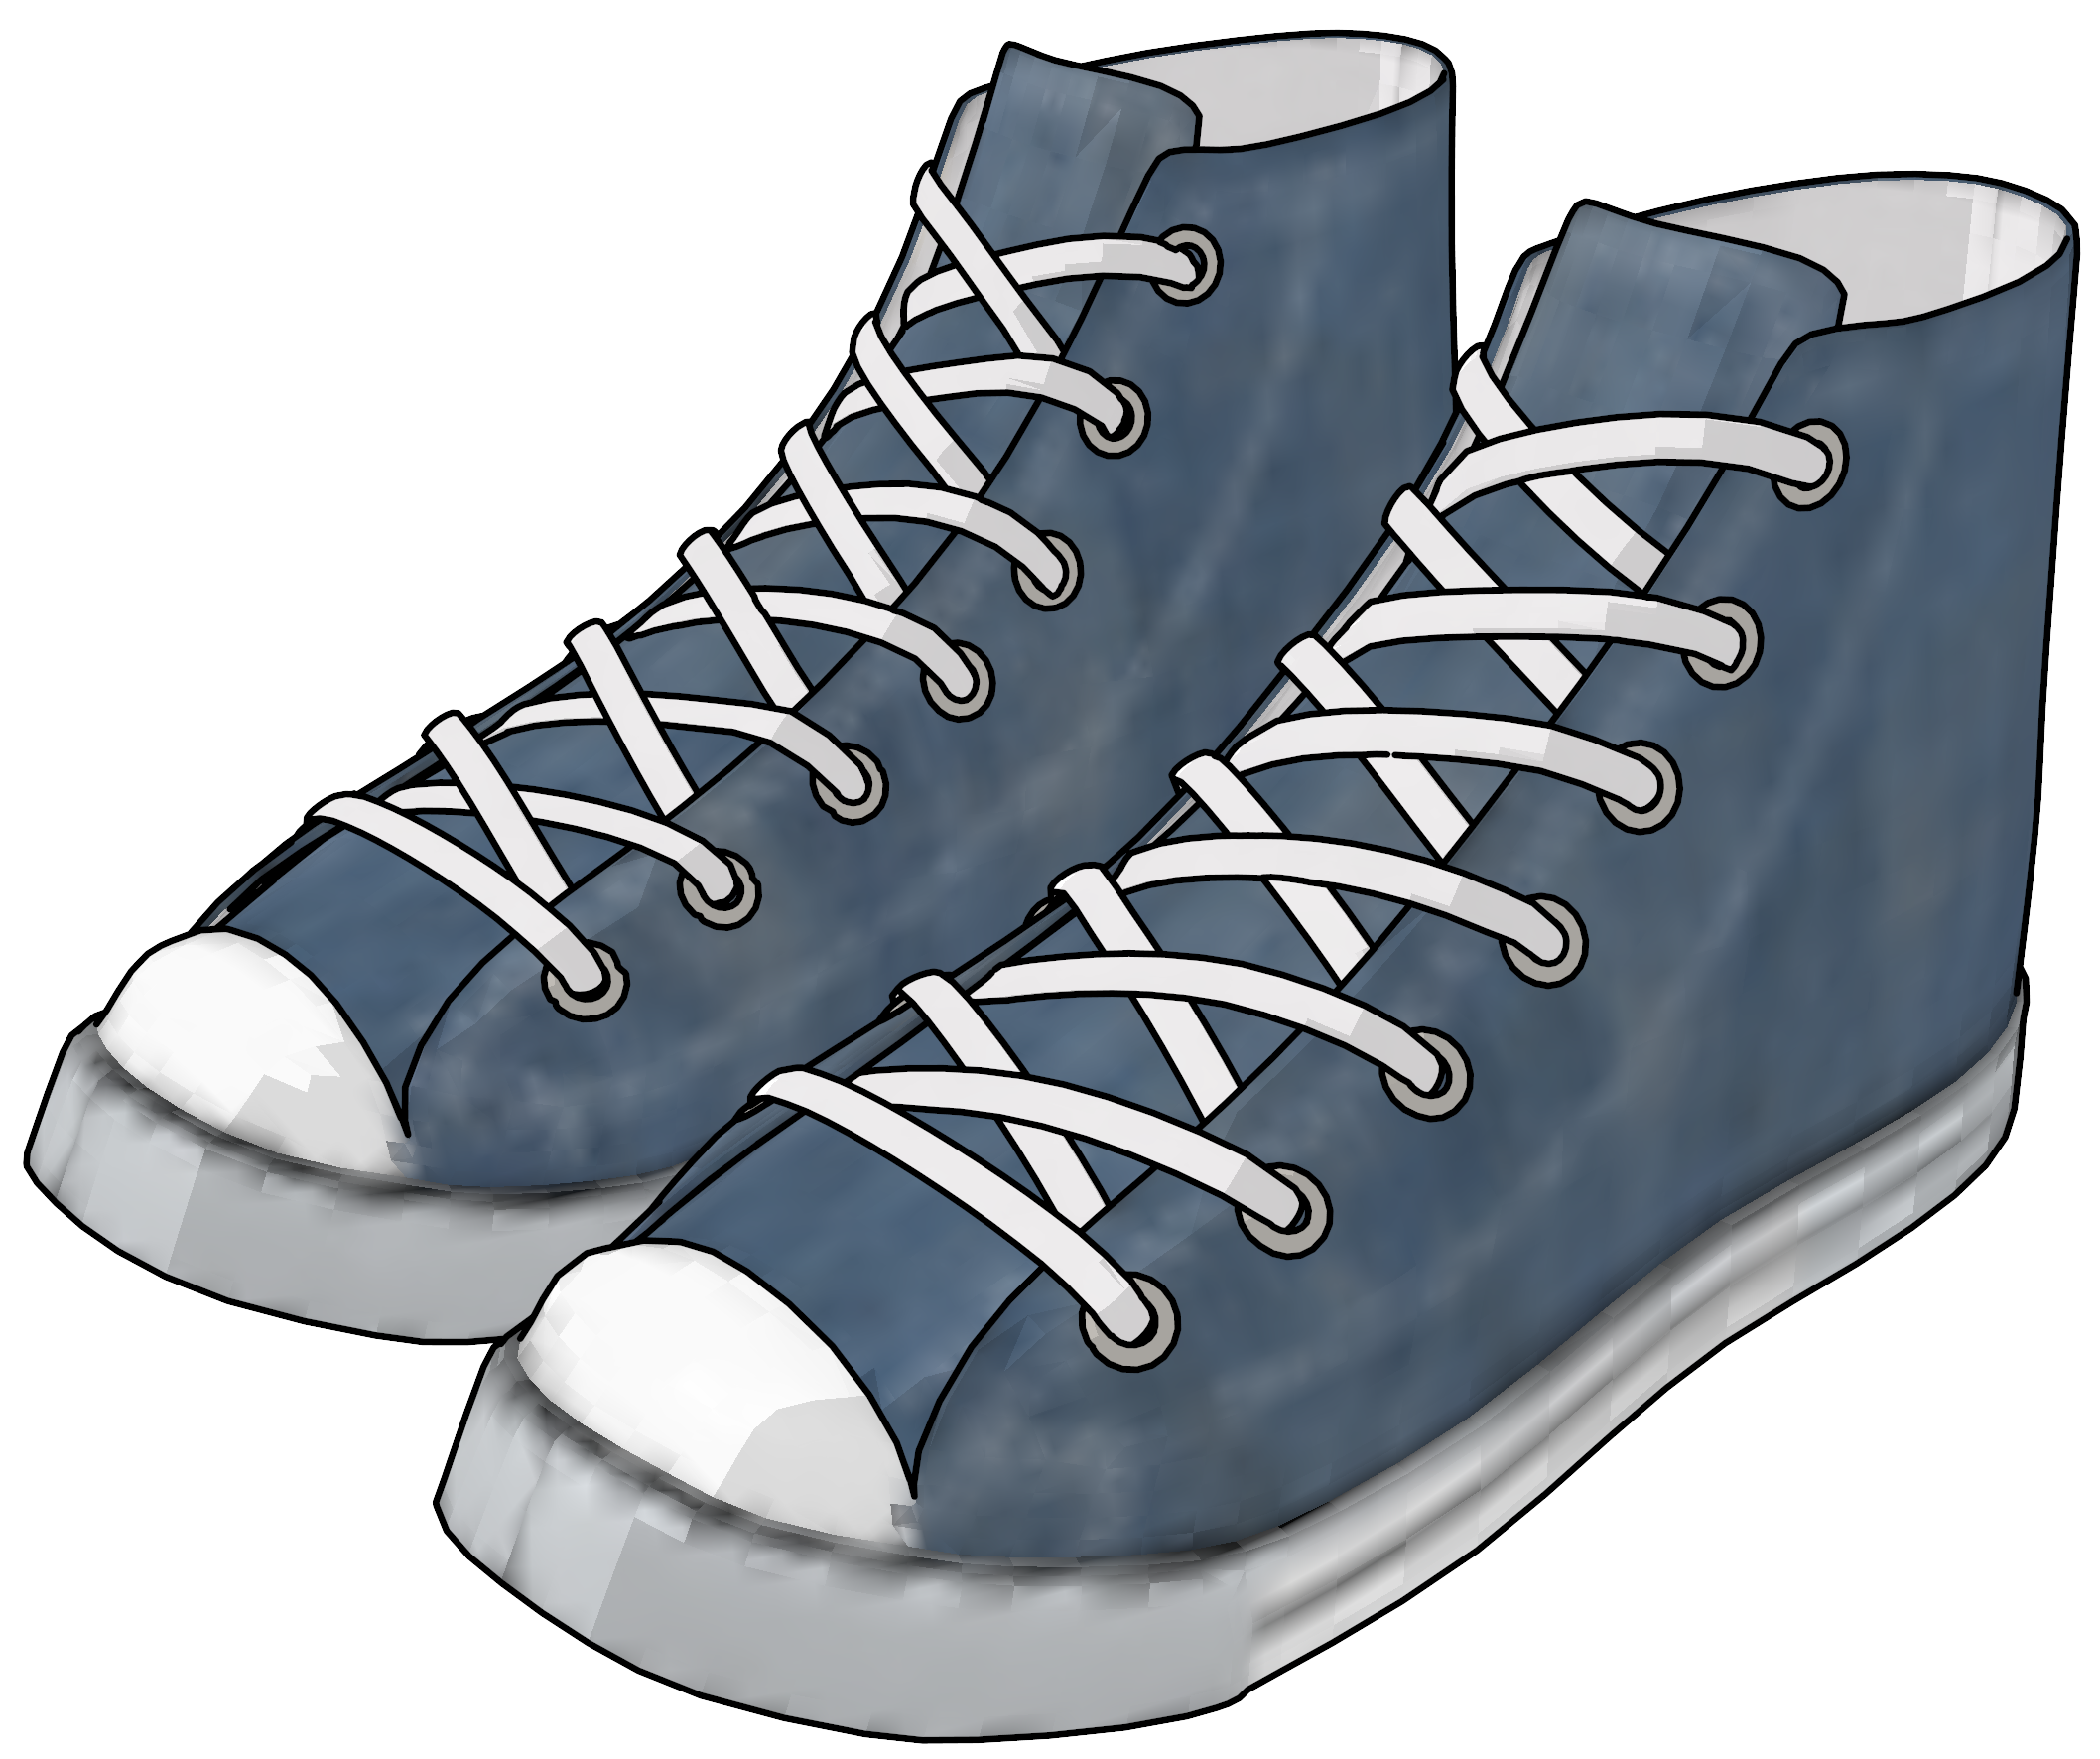 Converse clipart cool. Sneakers shoes png clipartly